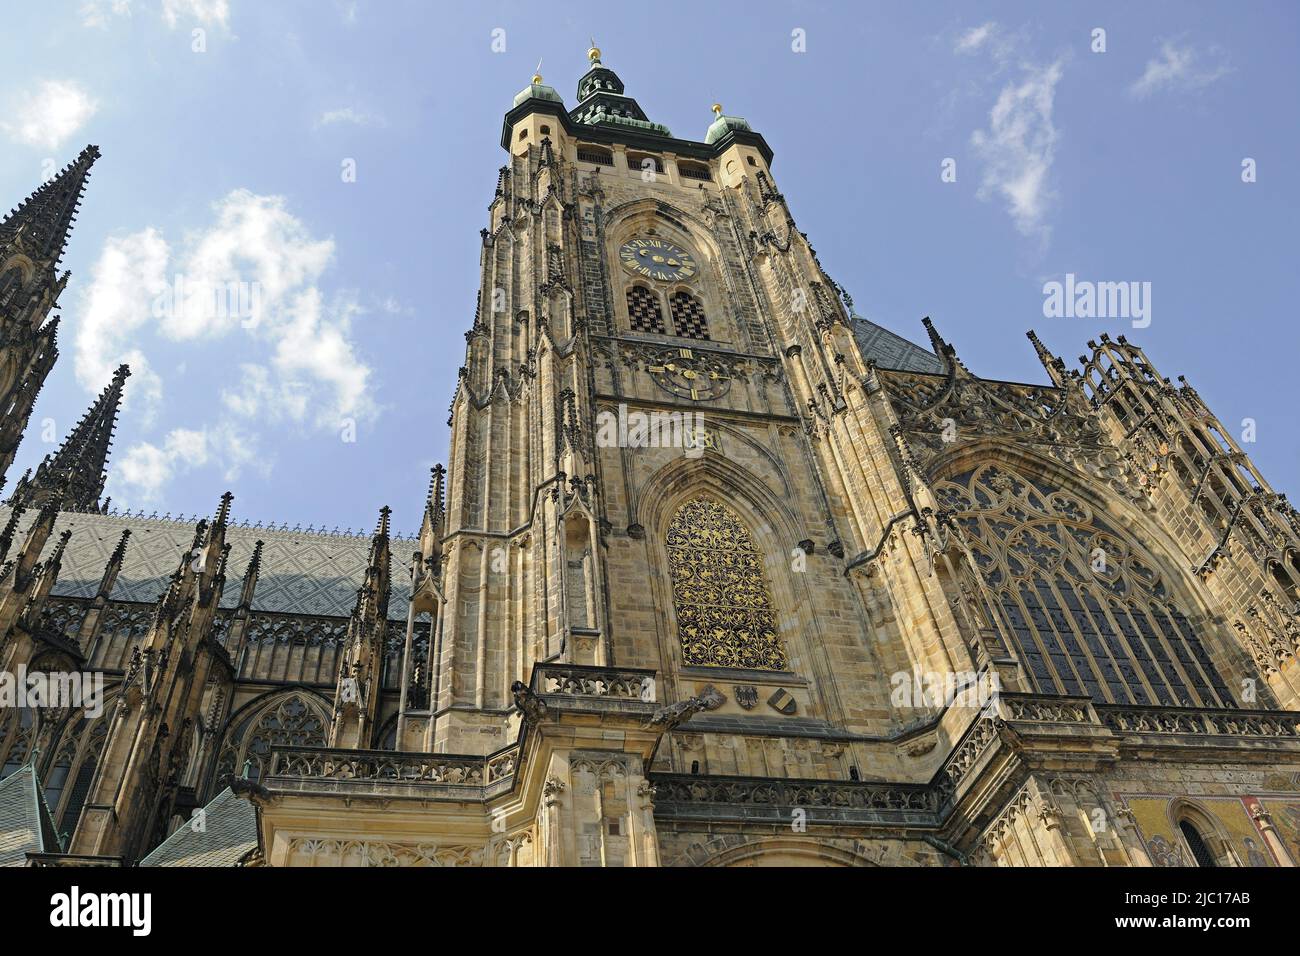 Accessible southern tower of St. Vitus Cathedral, Prague Castle, Hradschin, Czech Republic, Prague Stock Photo